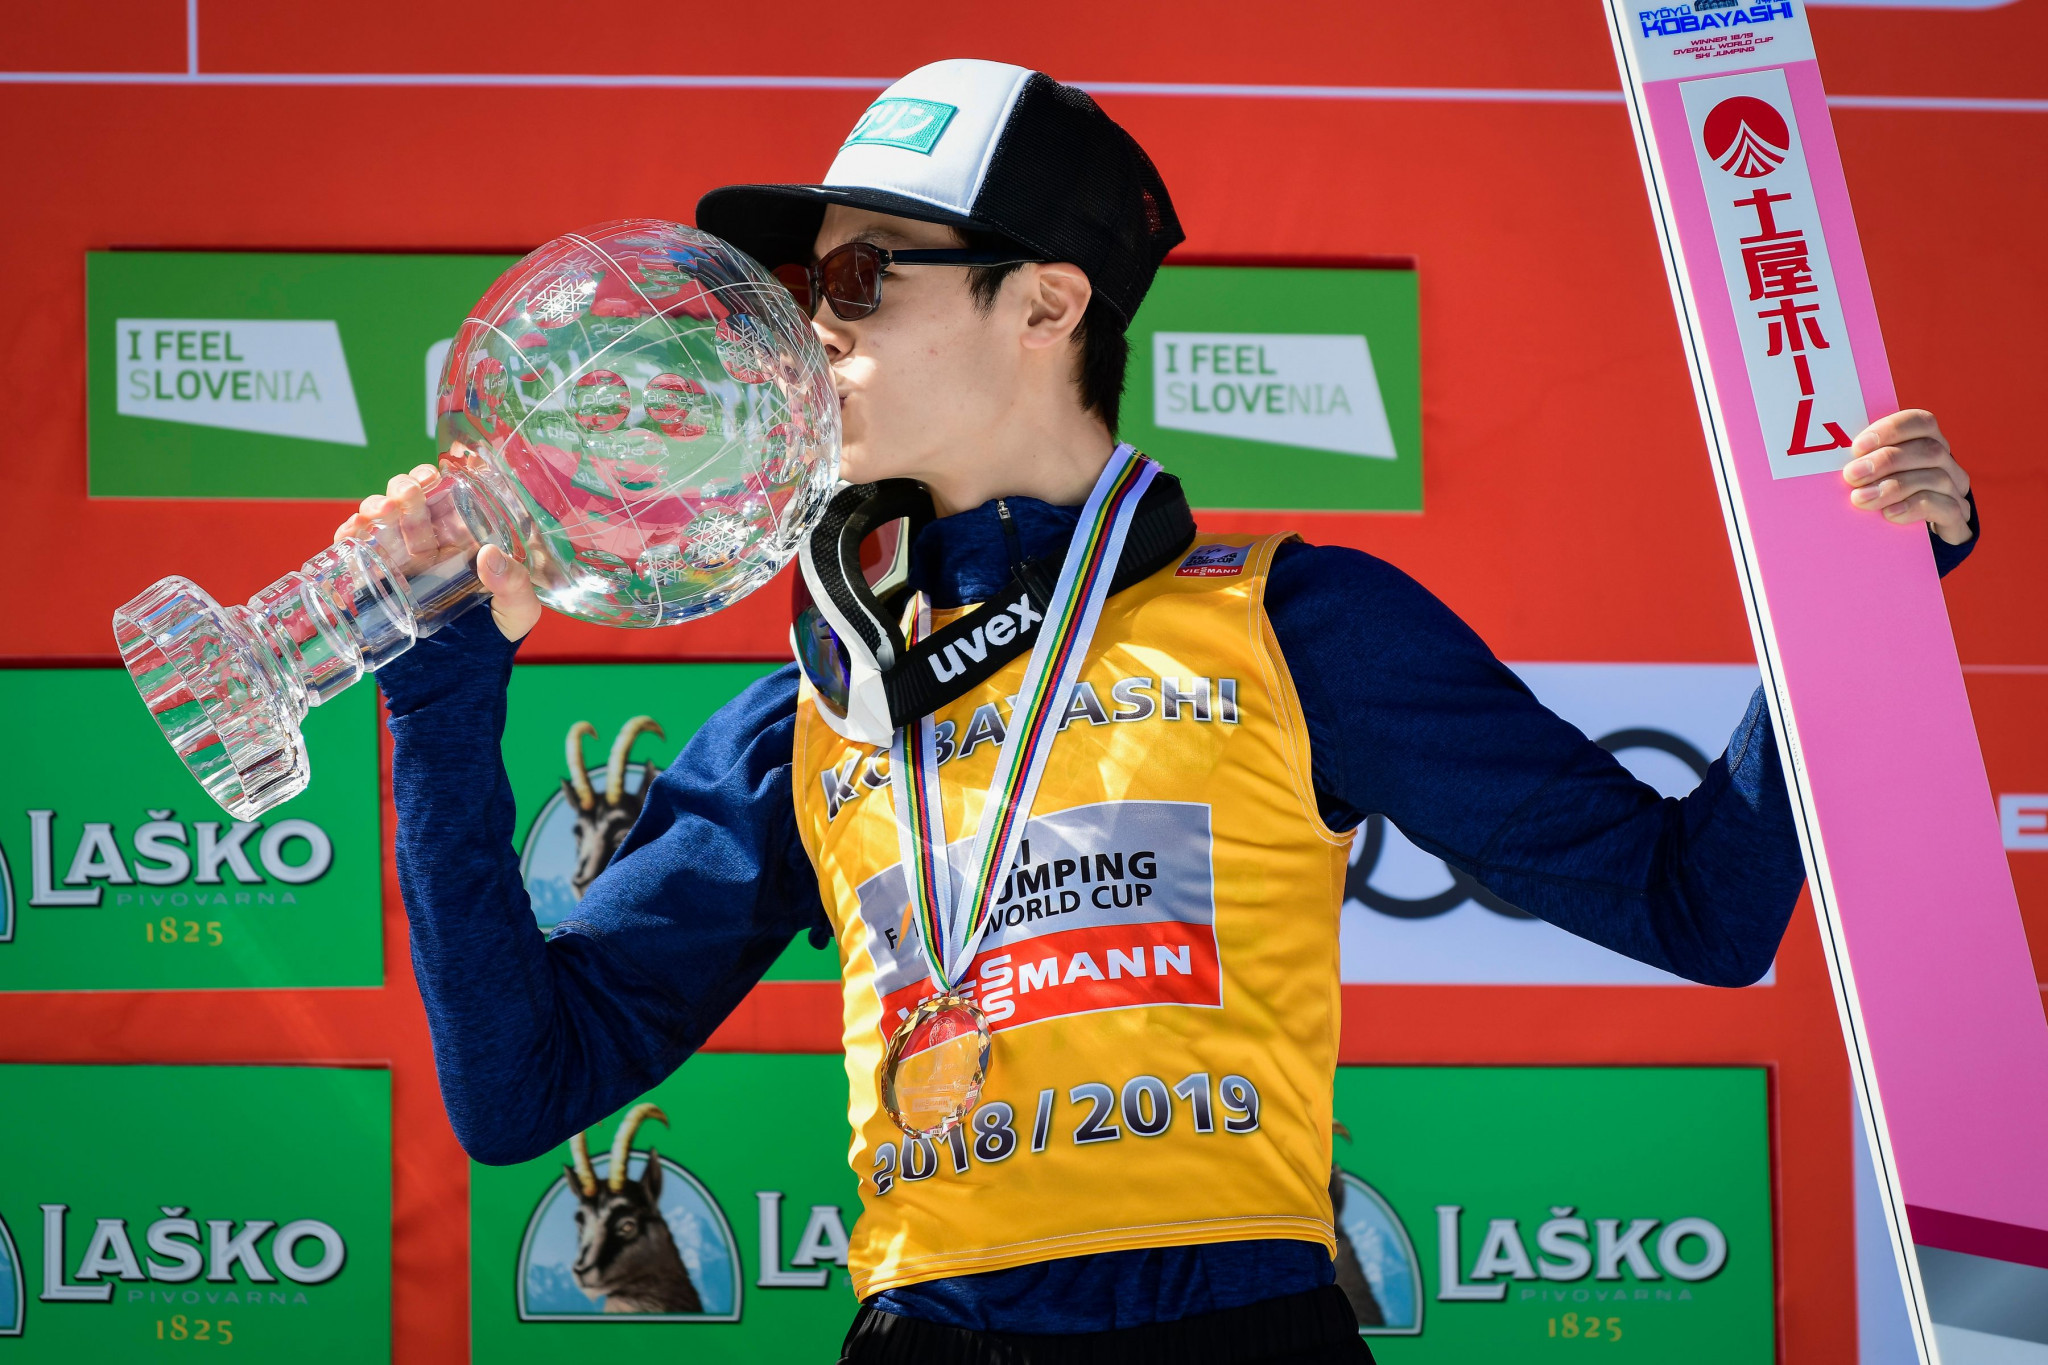 Ski Jumping World Cup champions Kobayashi and Lundby end season in style with victories